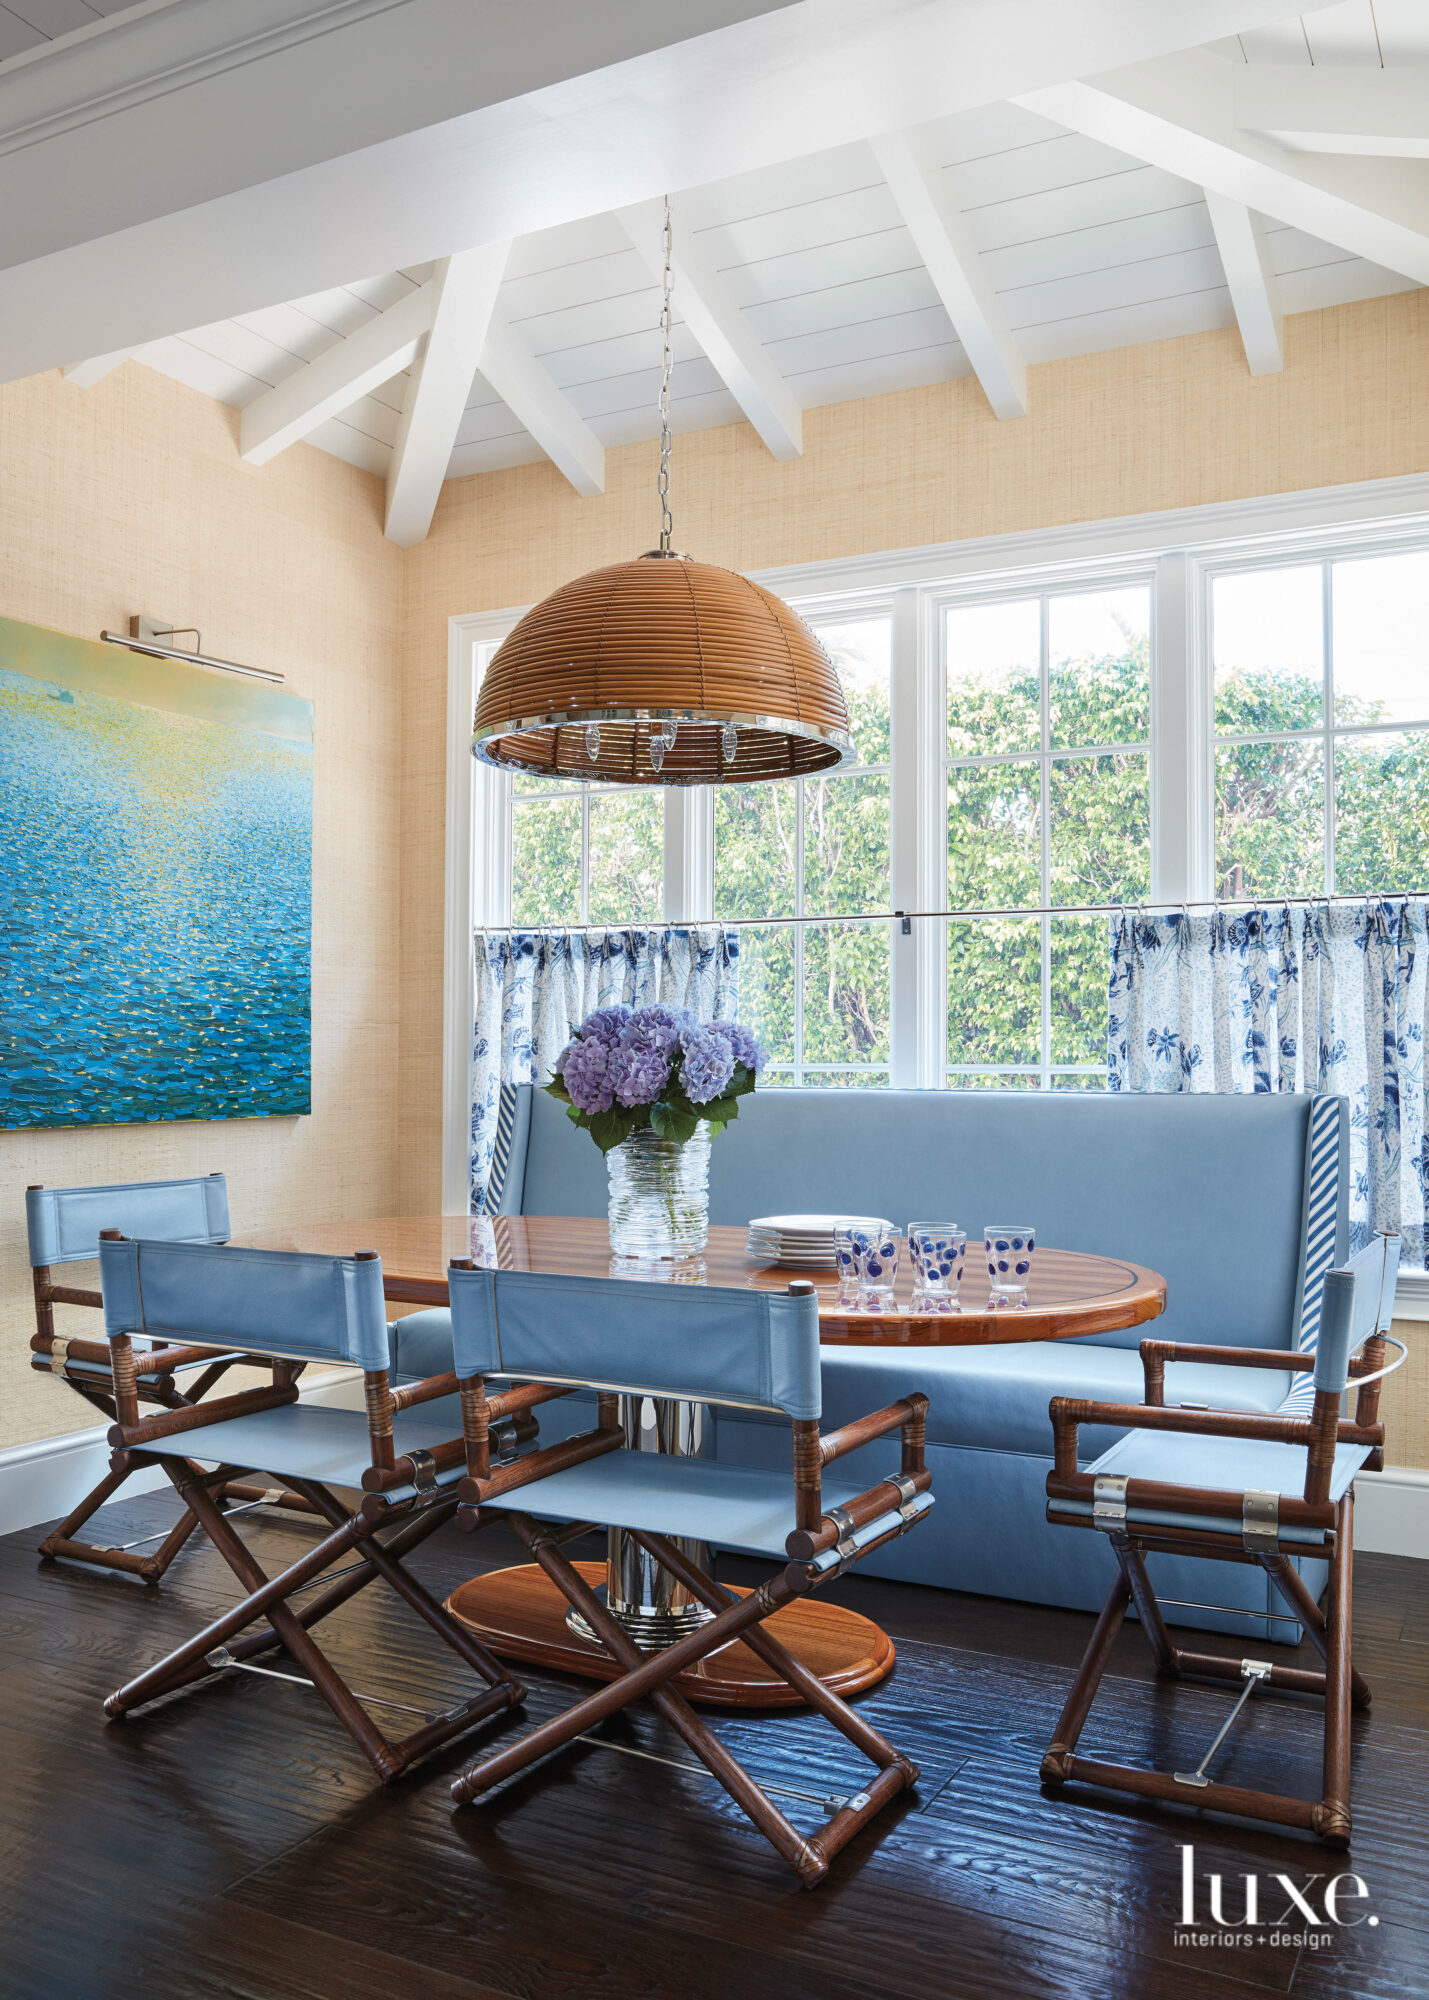 Breakfast nook with periwinkle-blue leather chairs beneath a reeded light fixture.